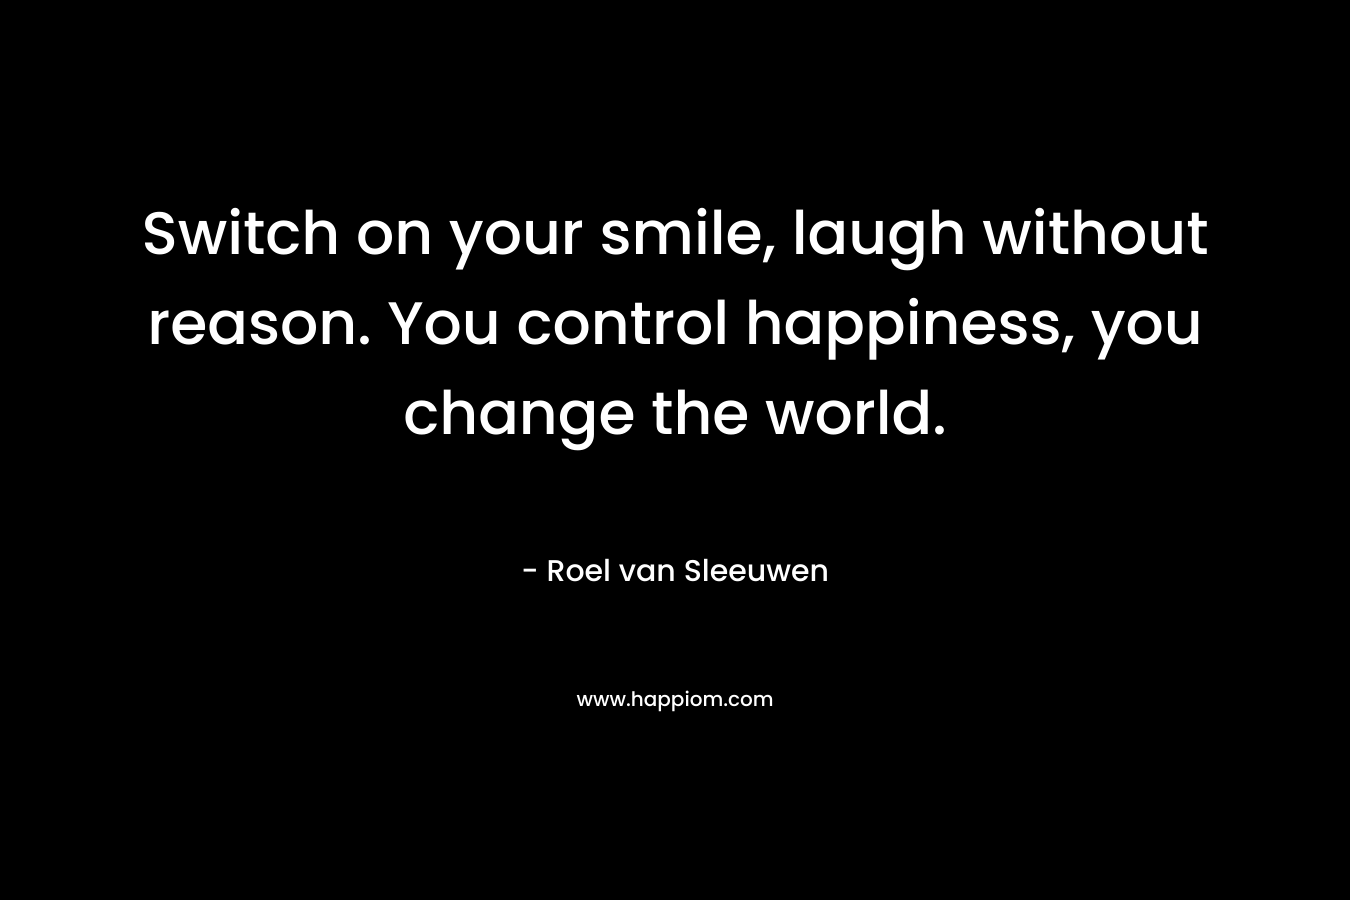 Switch on your smile, laugh without reason. You control happiness, you change the world.